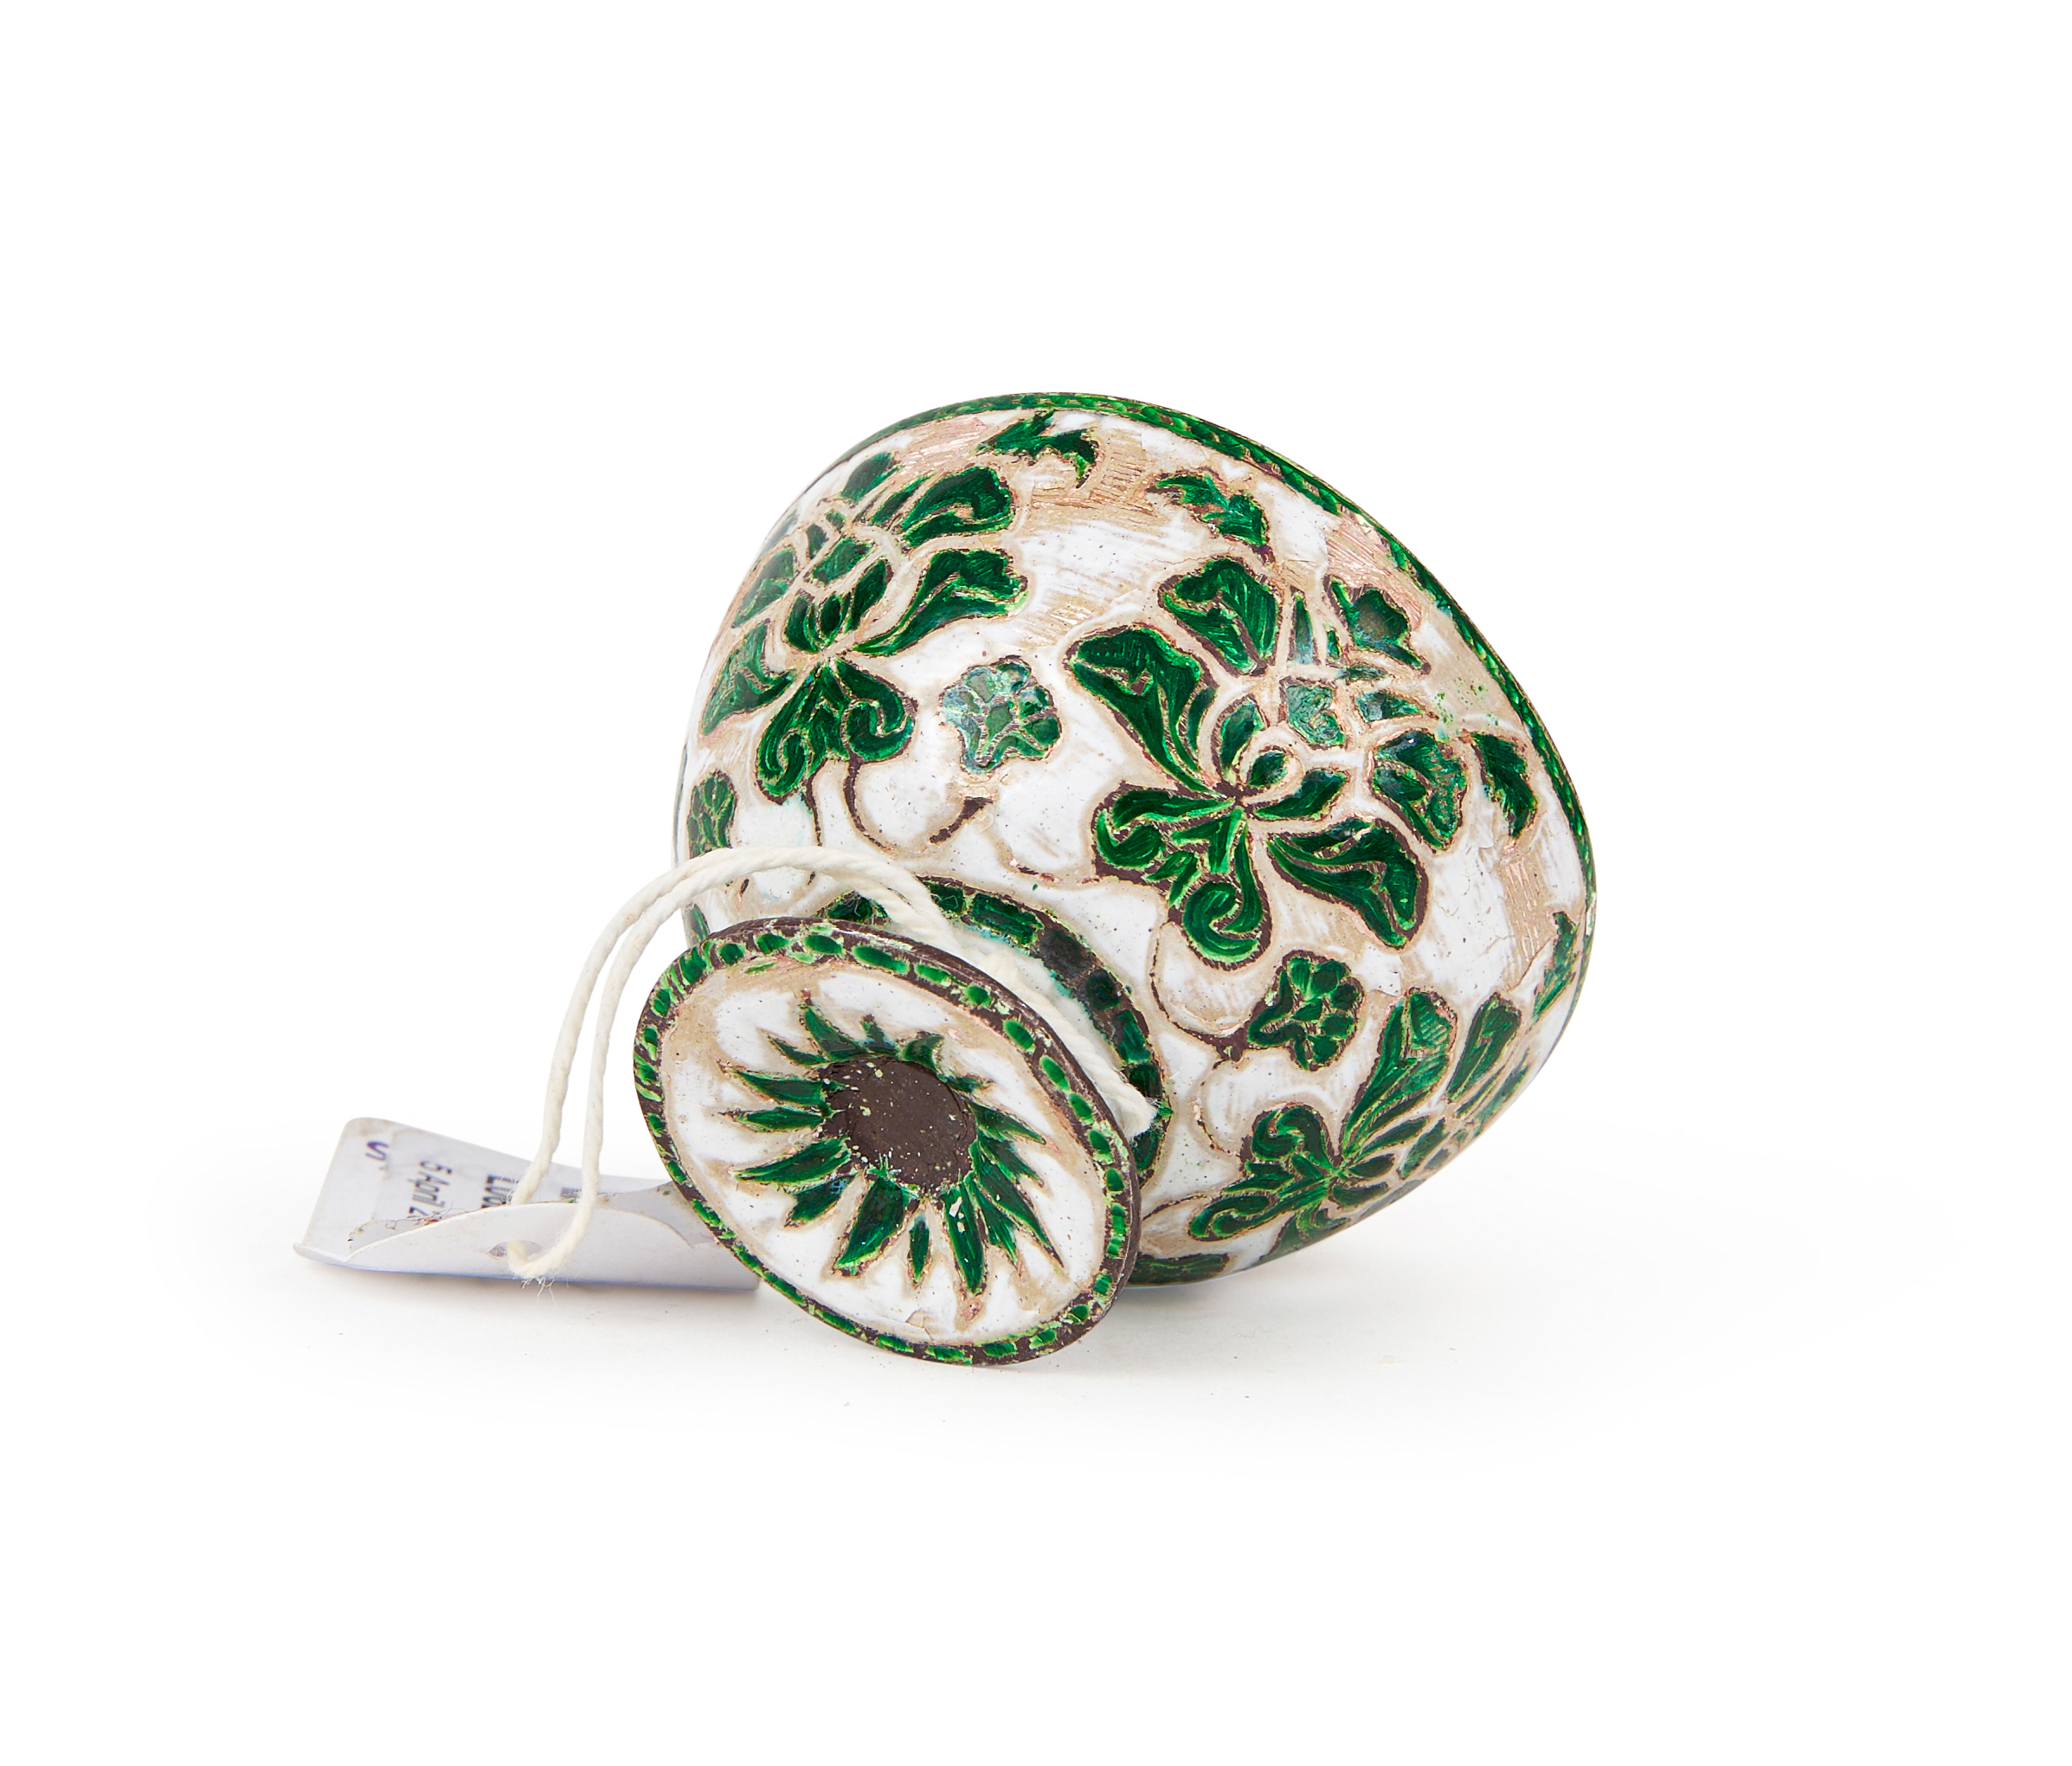 A ROYAL GREEN & WHITE ENAMELLED MUGHAL WINE CUP, 17TH CENTURY, INDIA - Image 5 of 5